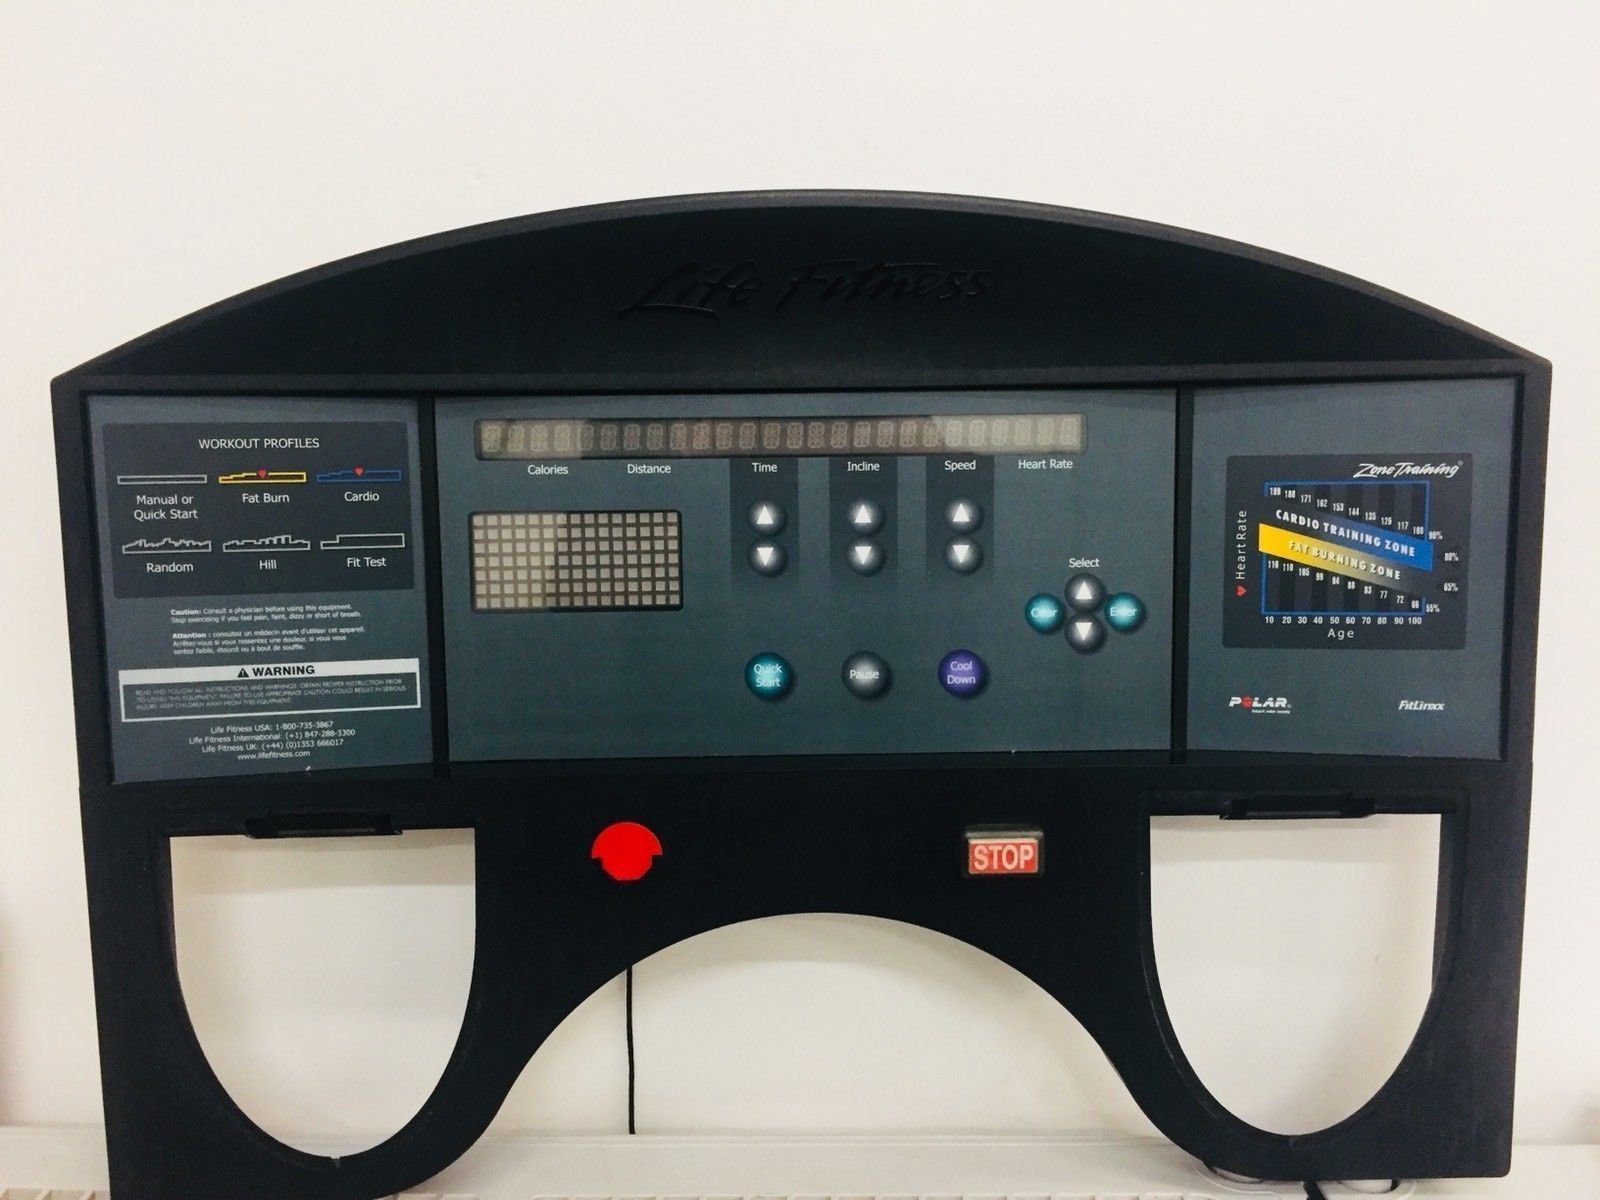 Console Display Control Panel